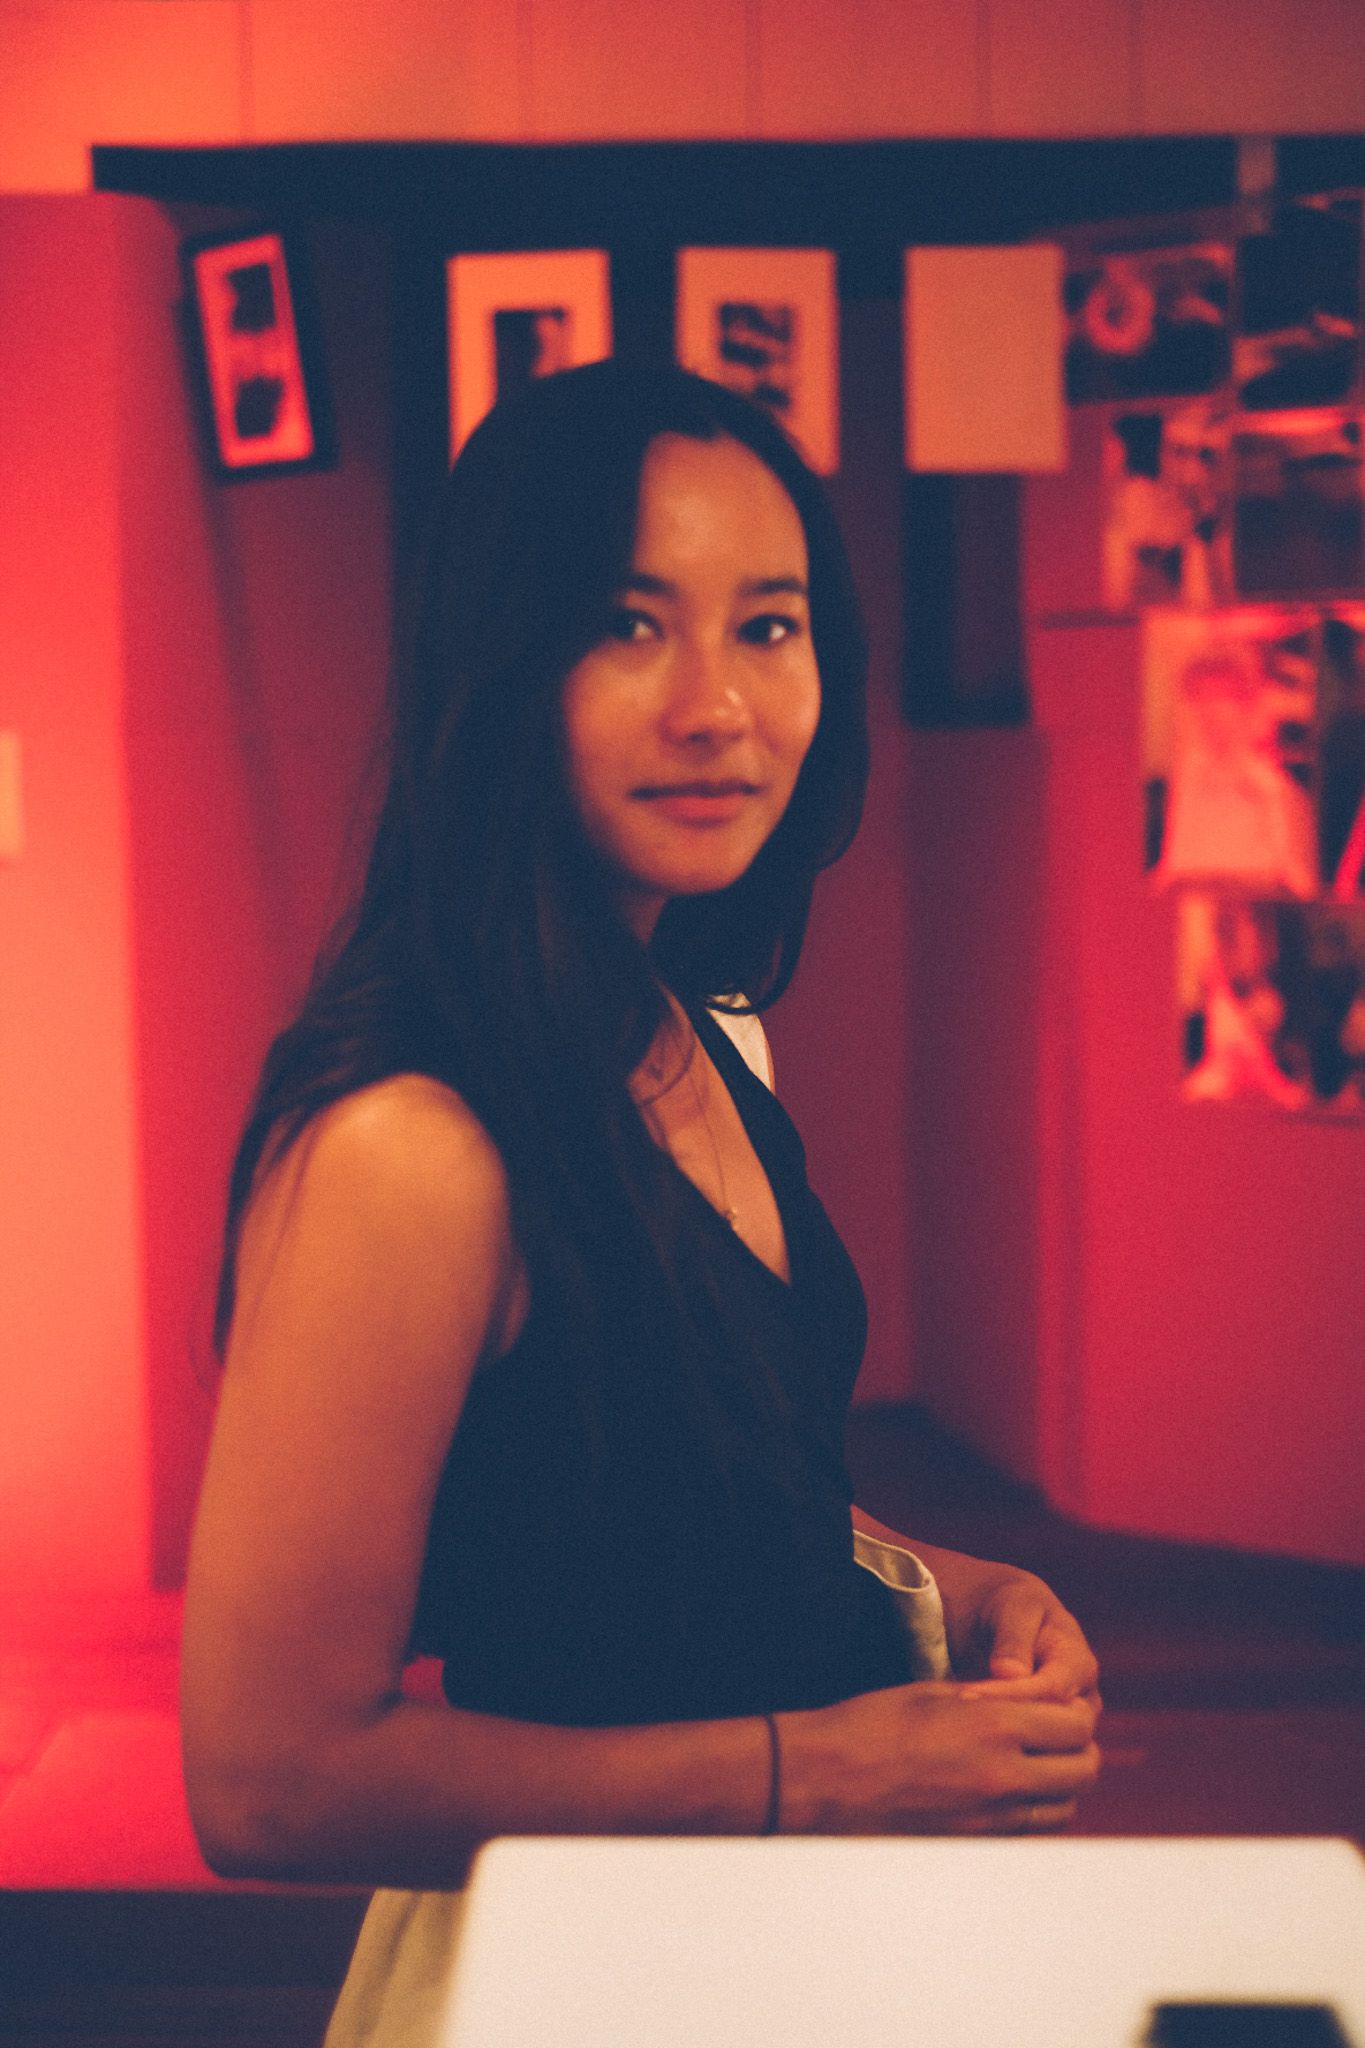 A woman with long, dark hair stands mid-frame in a room full of red, full of dark photographs, looking at the camera.